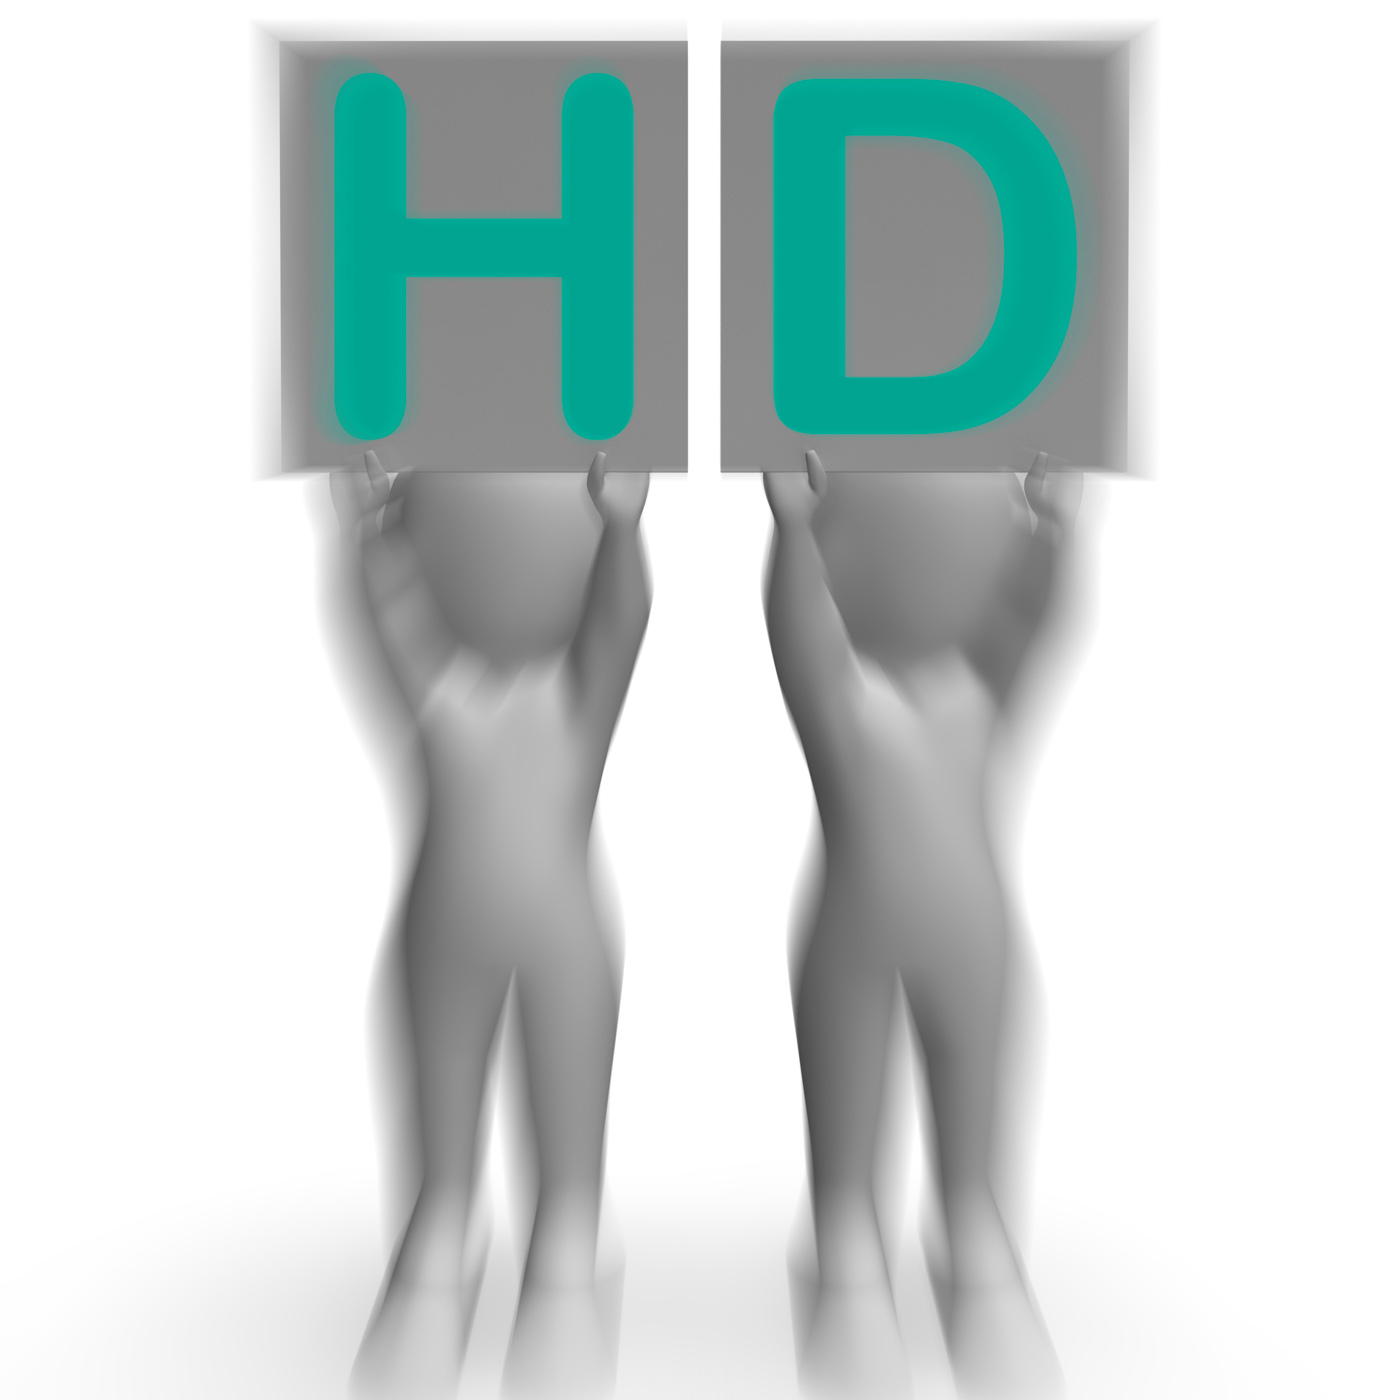 Free photo: HD Placards Mean High Definition Television Or High ...